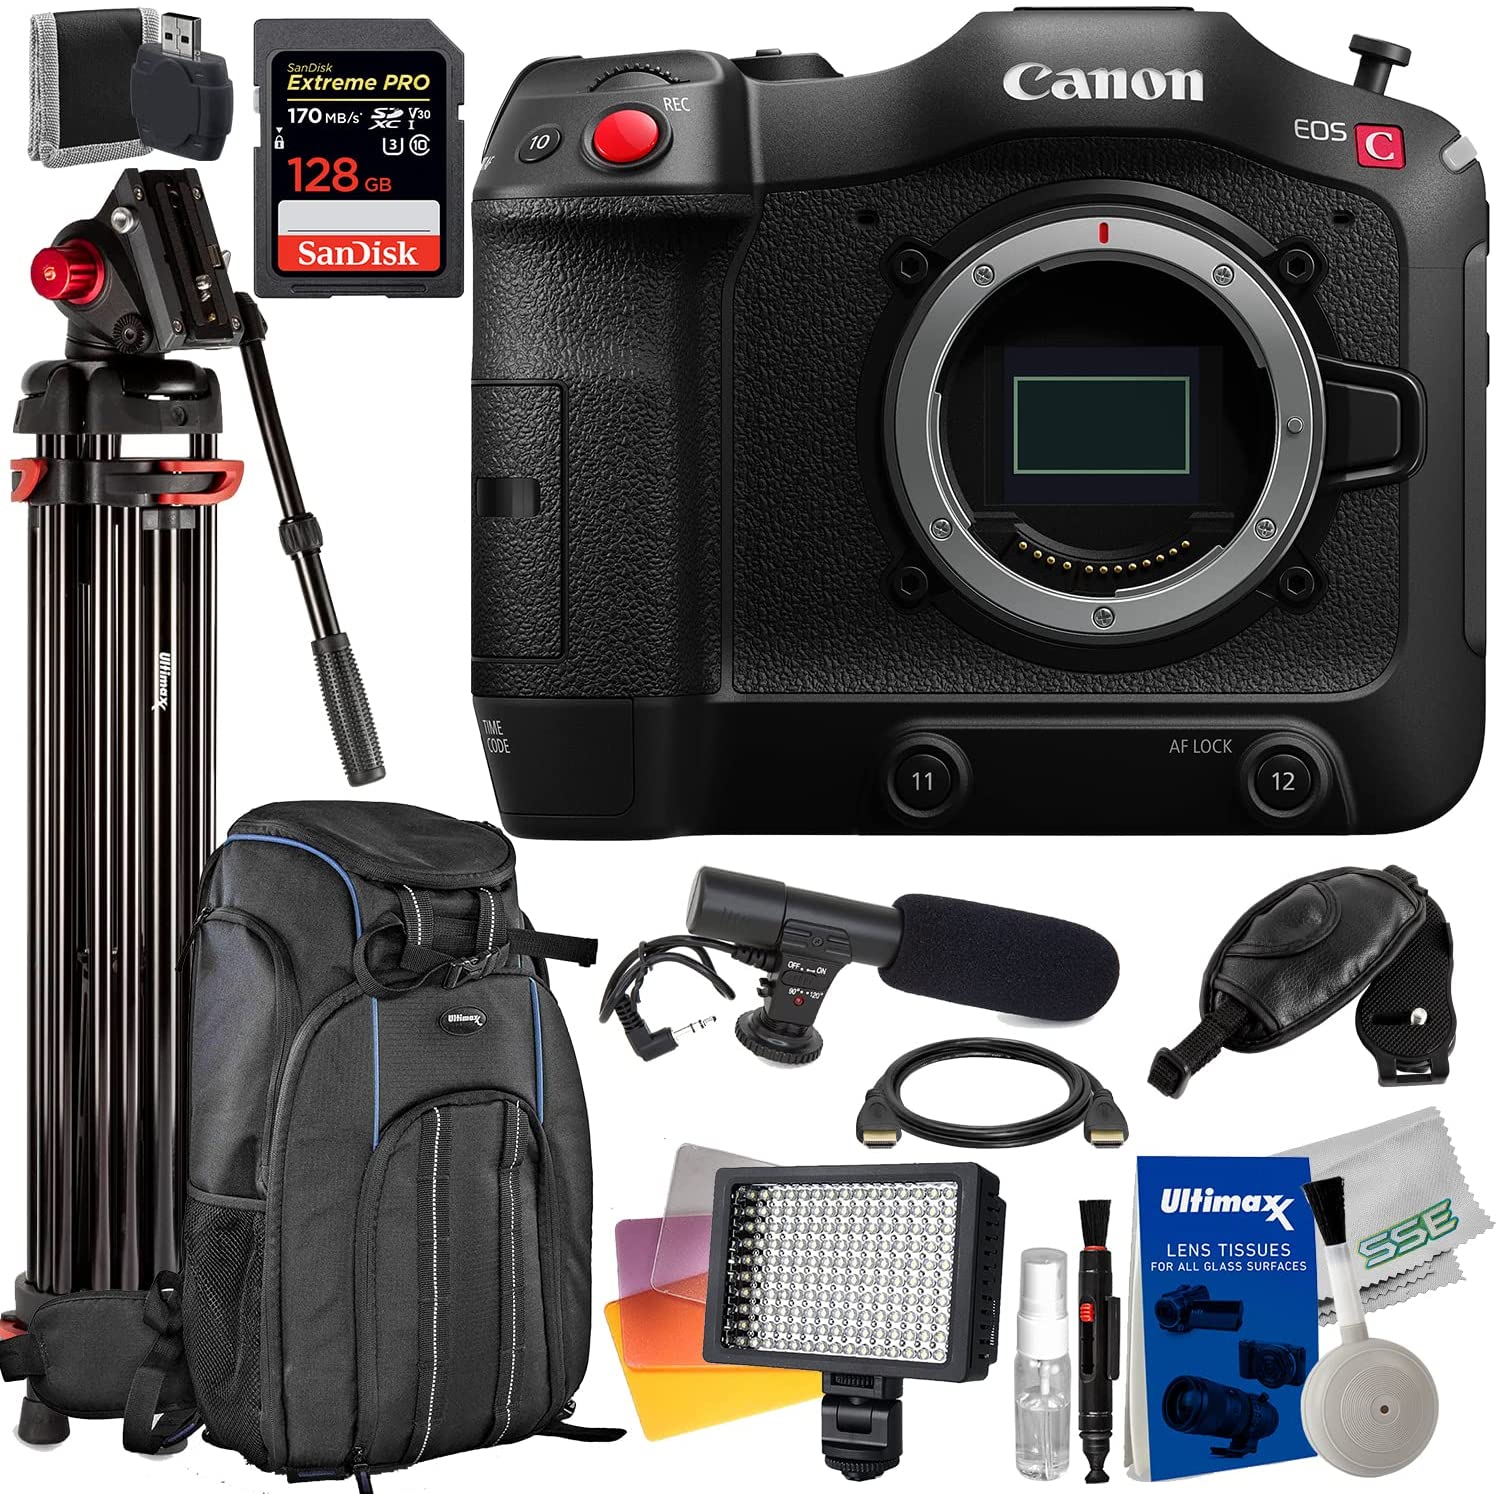 Canon EOS C70 Cinema Camera (RF Mount) with Essential Accessory Bundle - Includes: SanDisk Extreme Pro 128GB SDXC, Professional 72â? Video Tripod, Water Resistant Deluxe Backpack & Much More